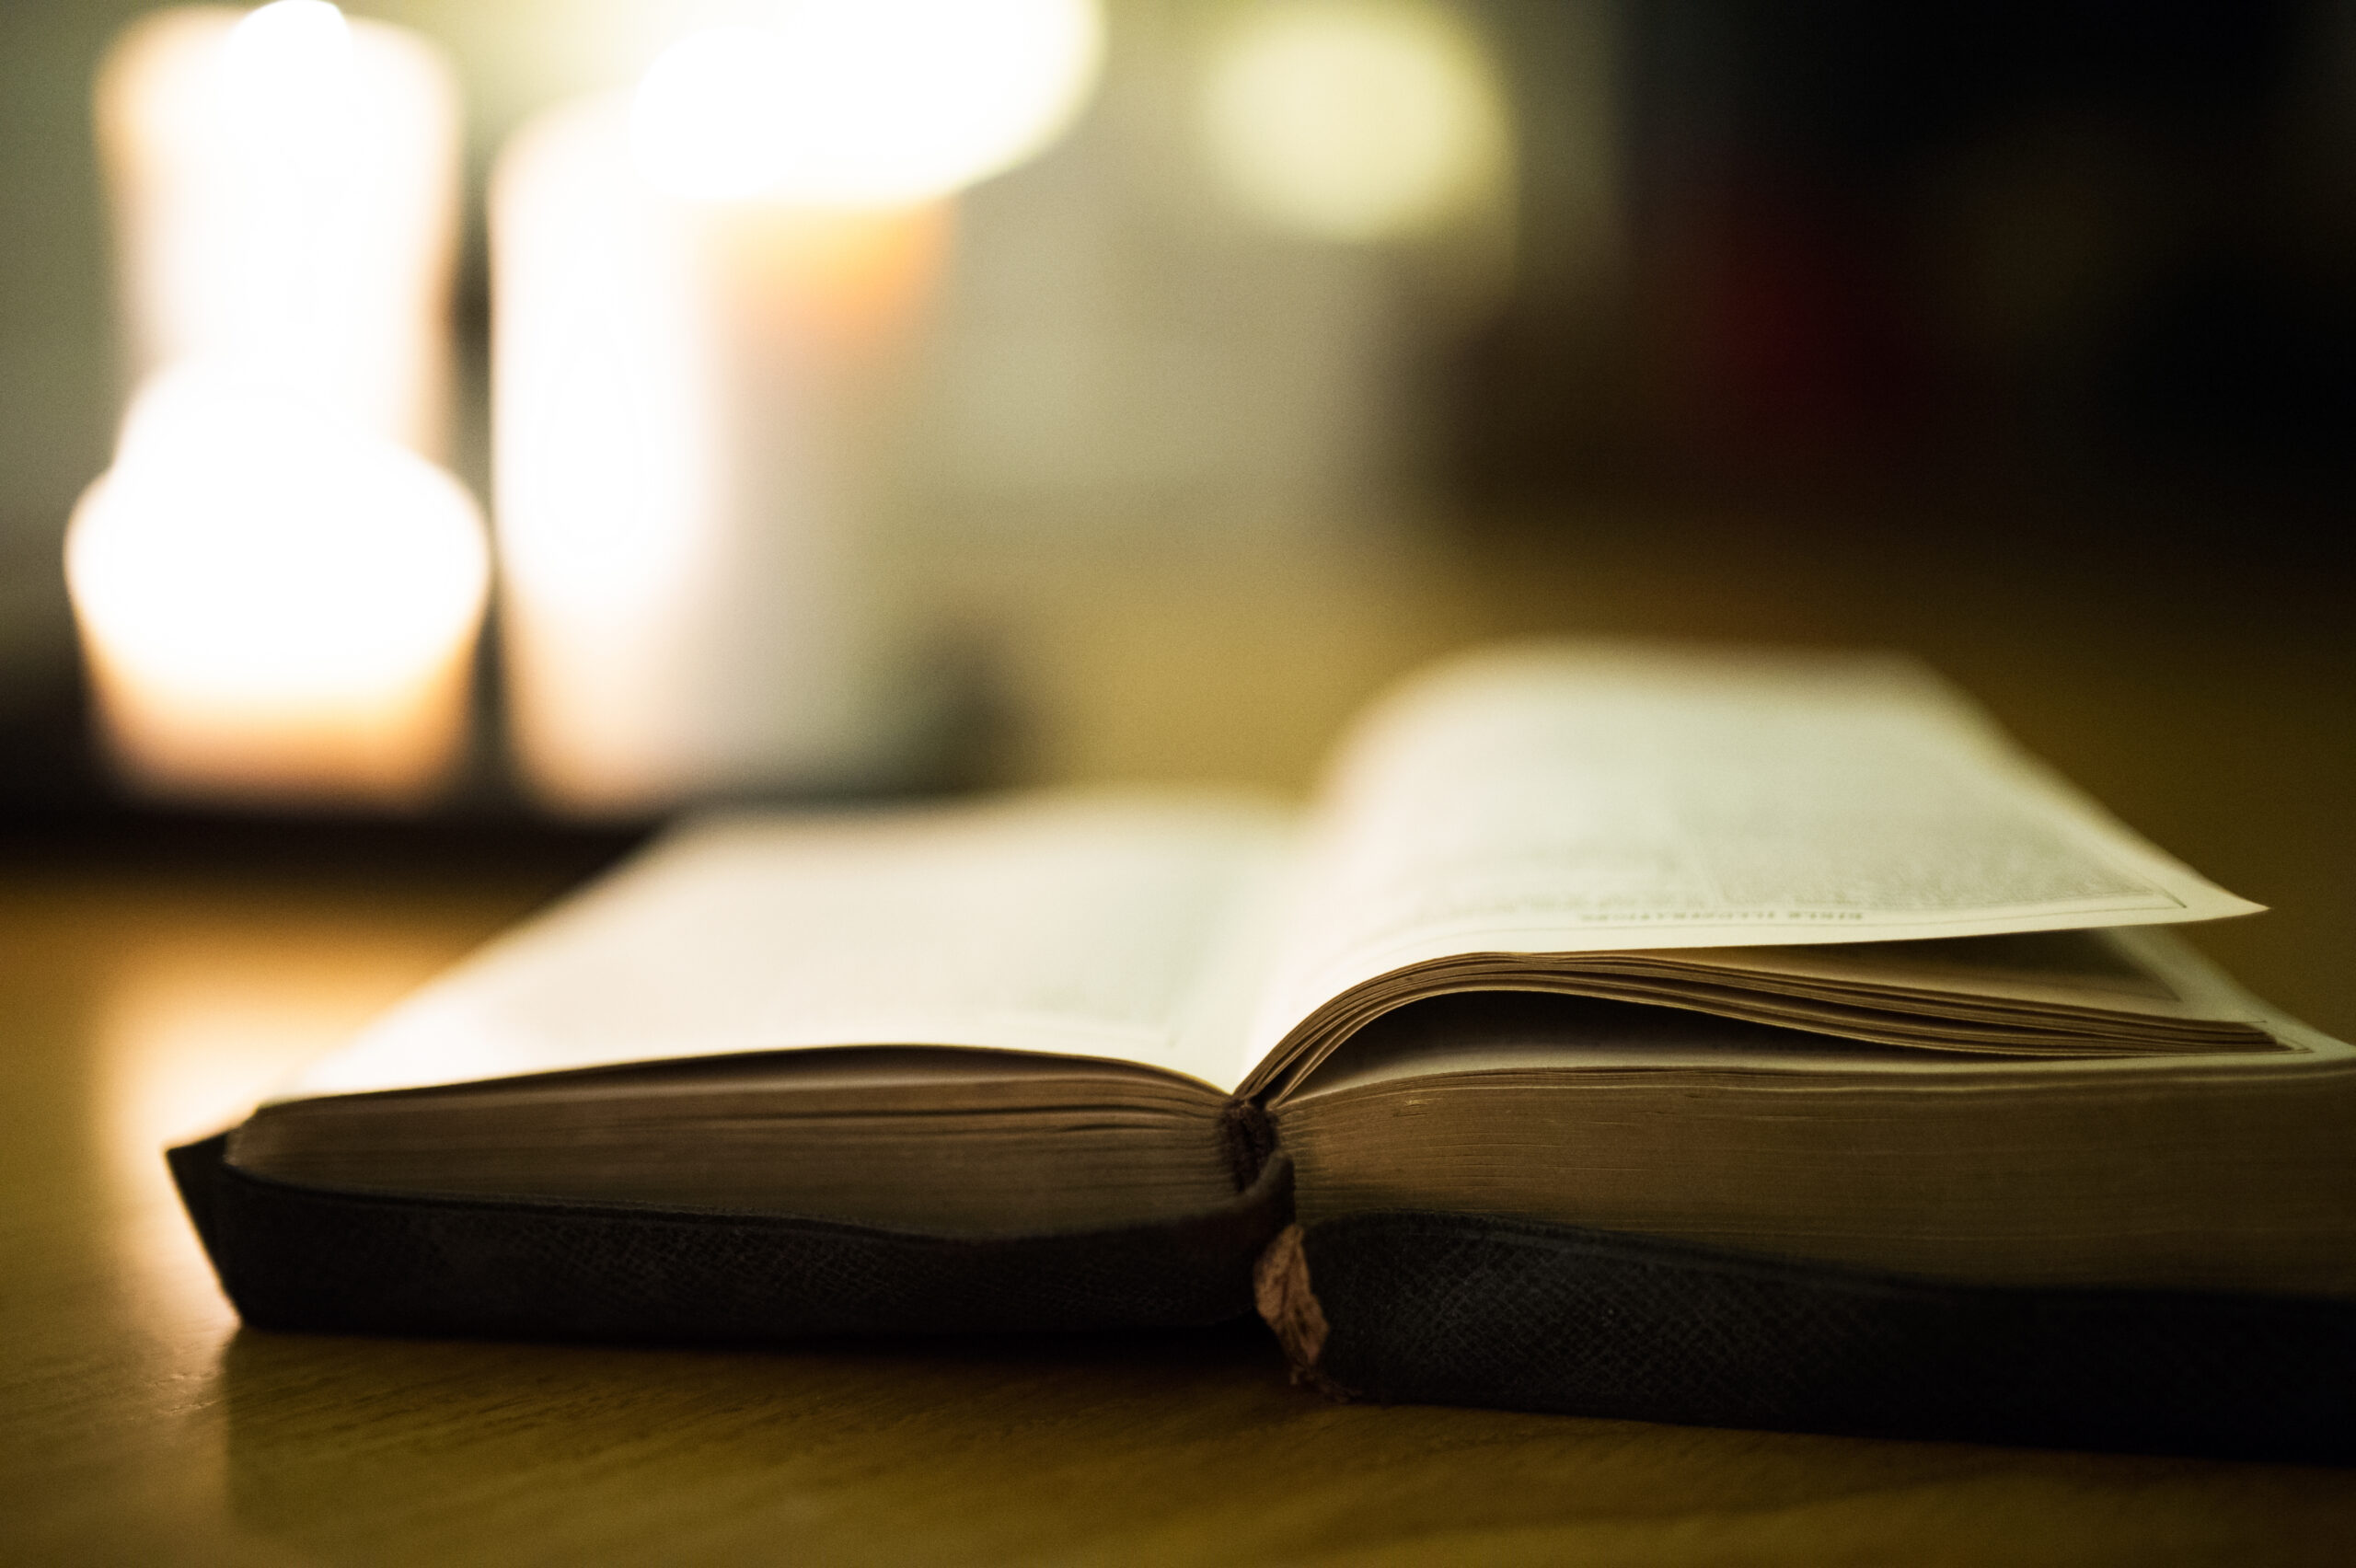 graphicstock close up of an old bible laid on wooden floor burning candles in the background H x53hu8Mb scaled